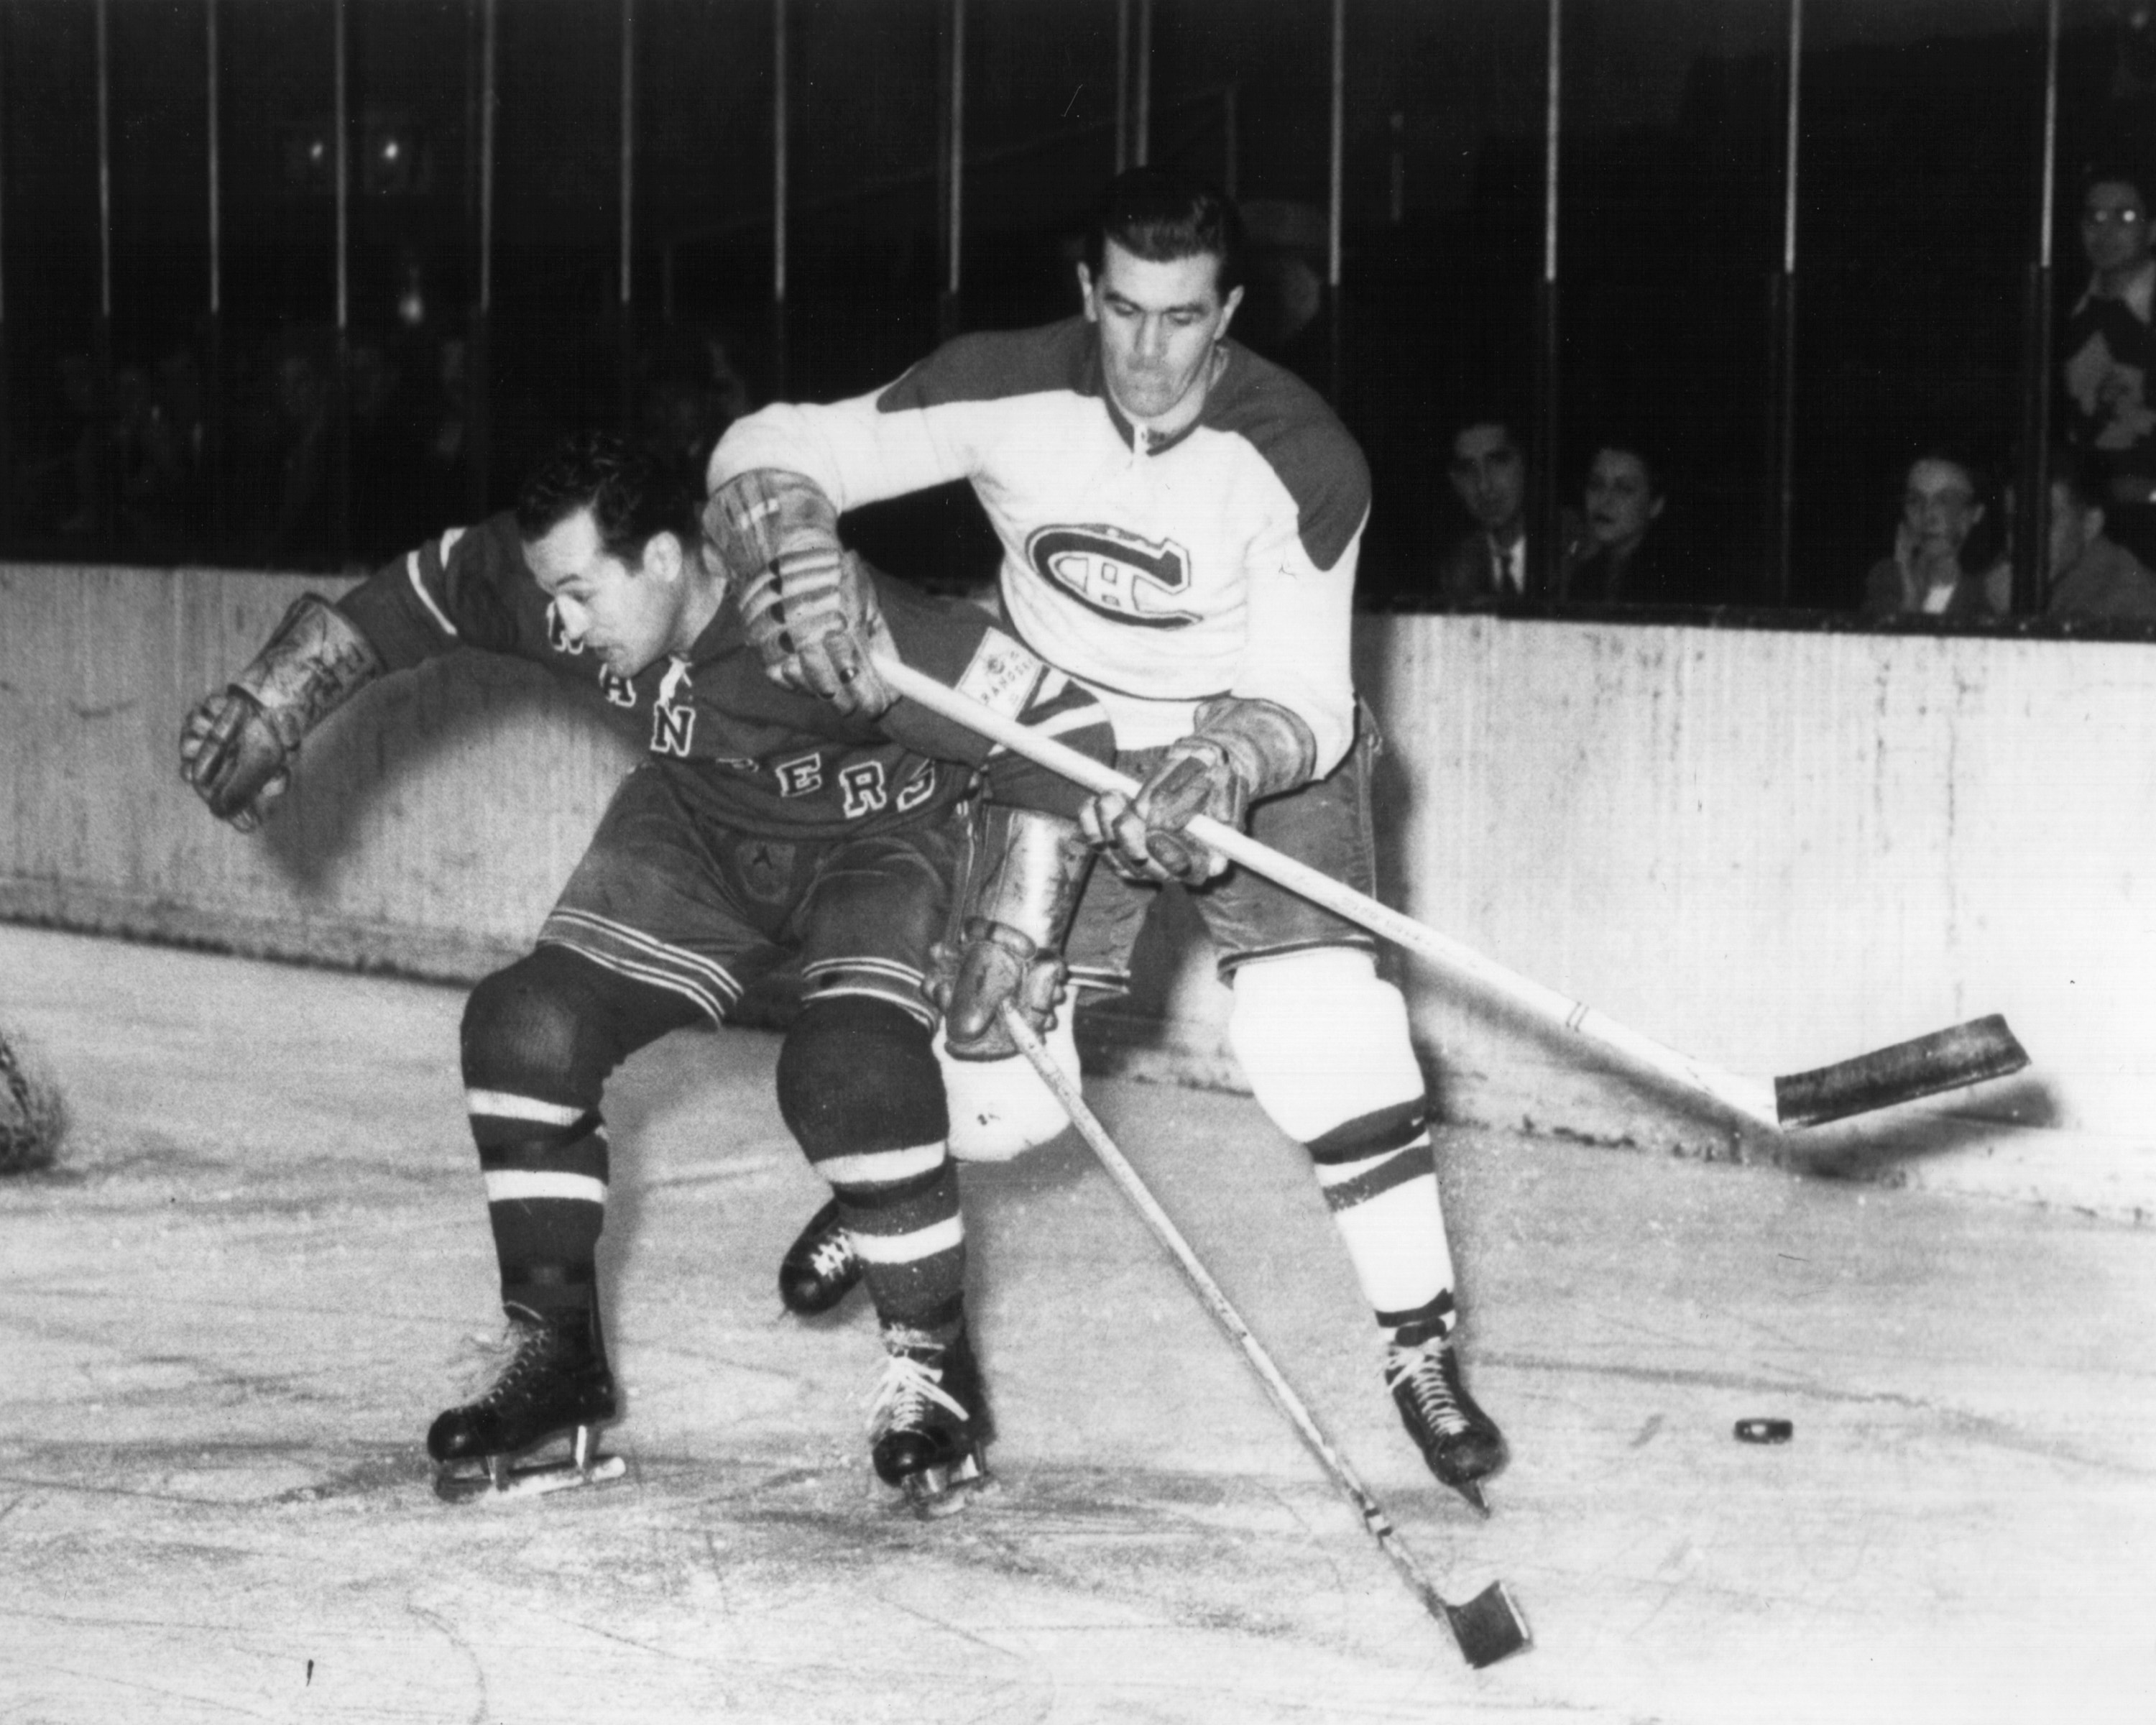 NEW YORK, NY - 1950: Maurice Richard #9 of the Montreal Canadiens battles with Edgar Laprade of the New York Rangers during an NHL game circa 1950 at Madison Square Garden in New York, New York. (Photo by Bruce Bennett Studios/Getty Images)